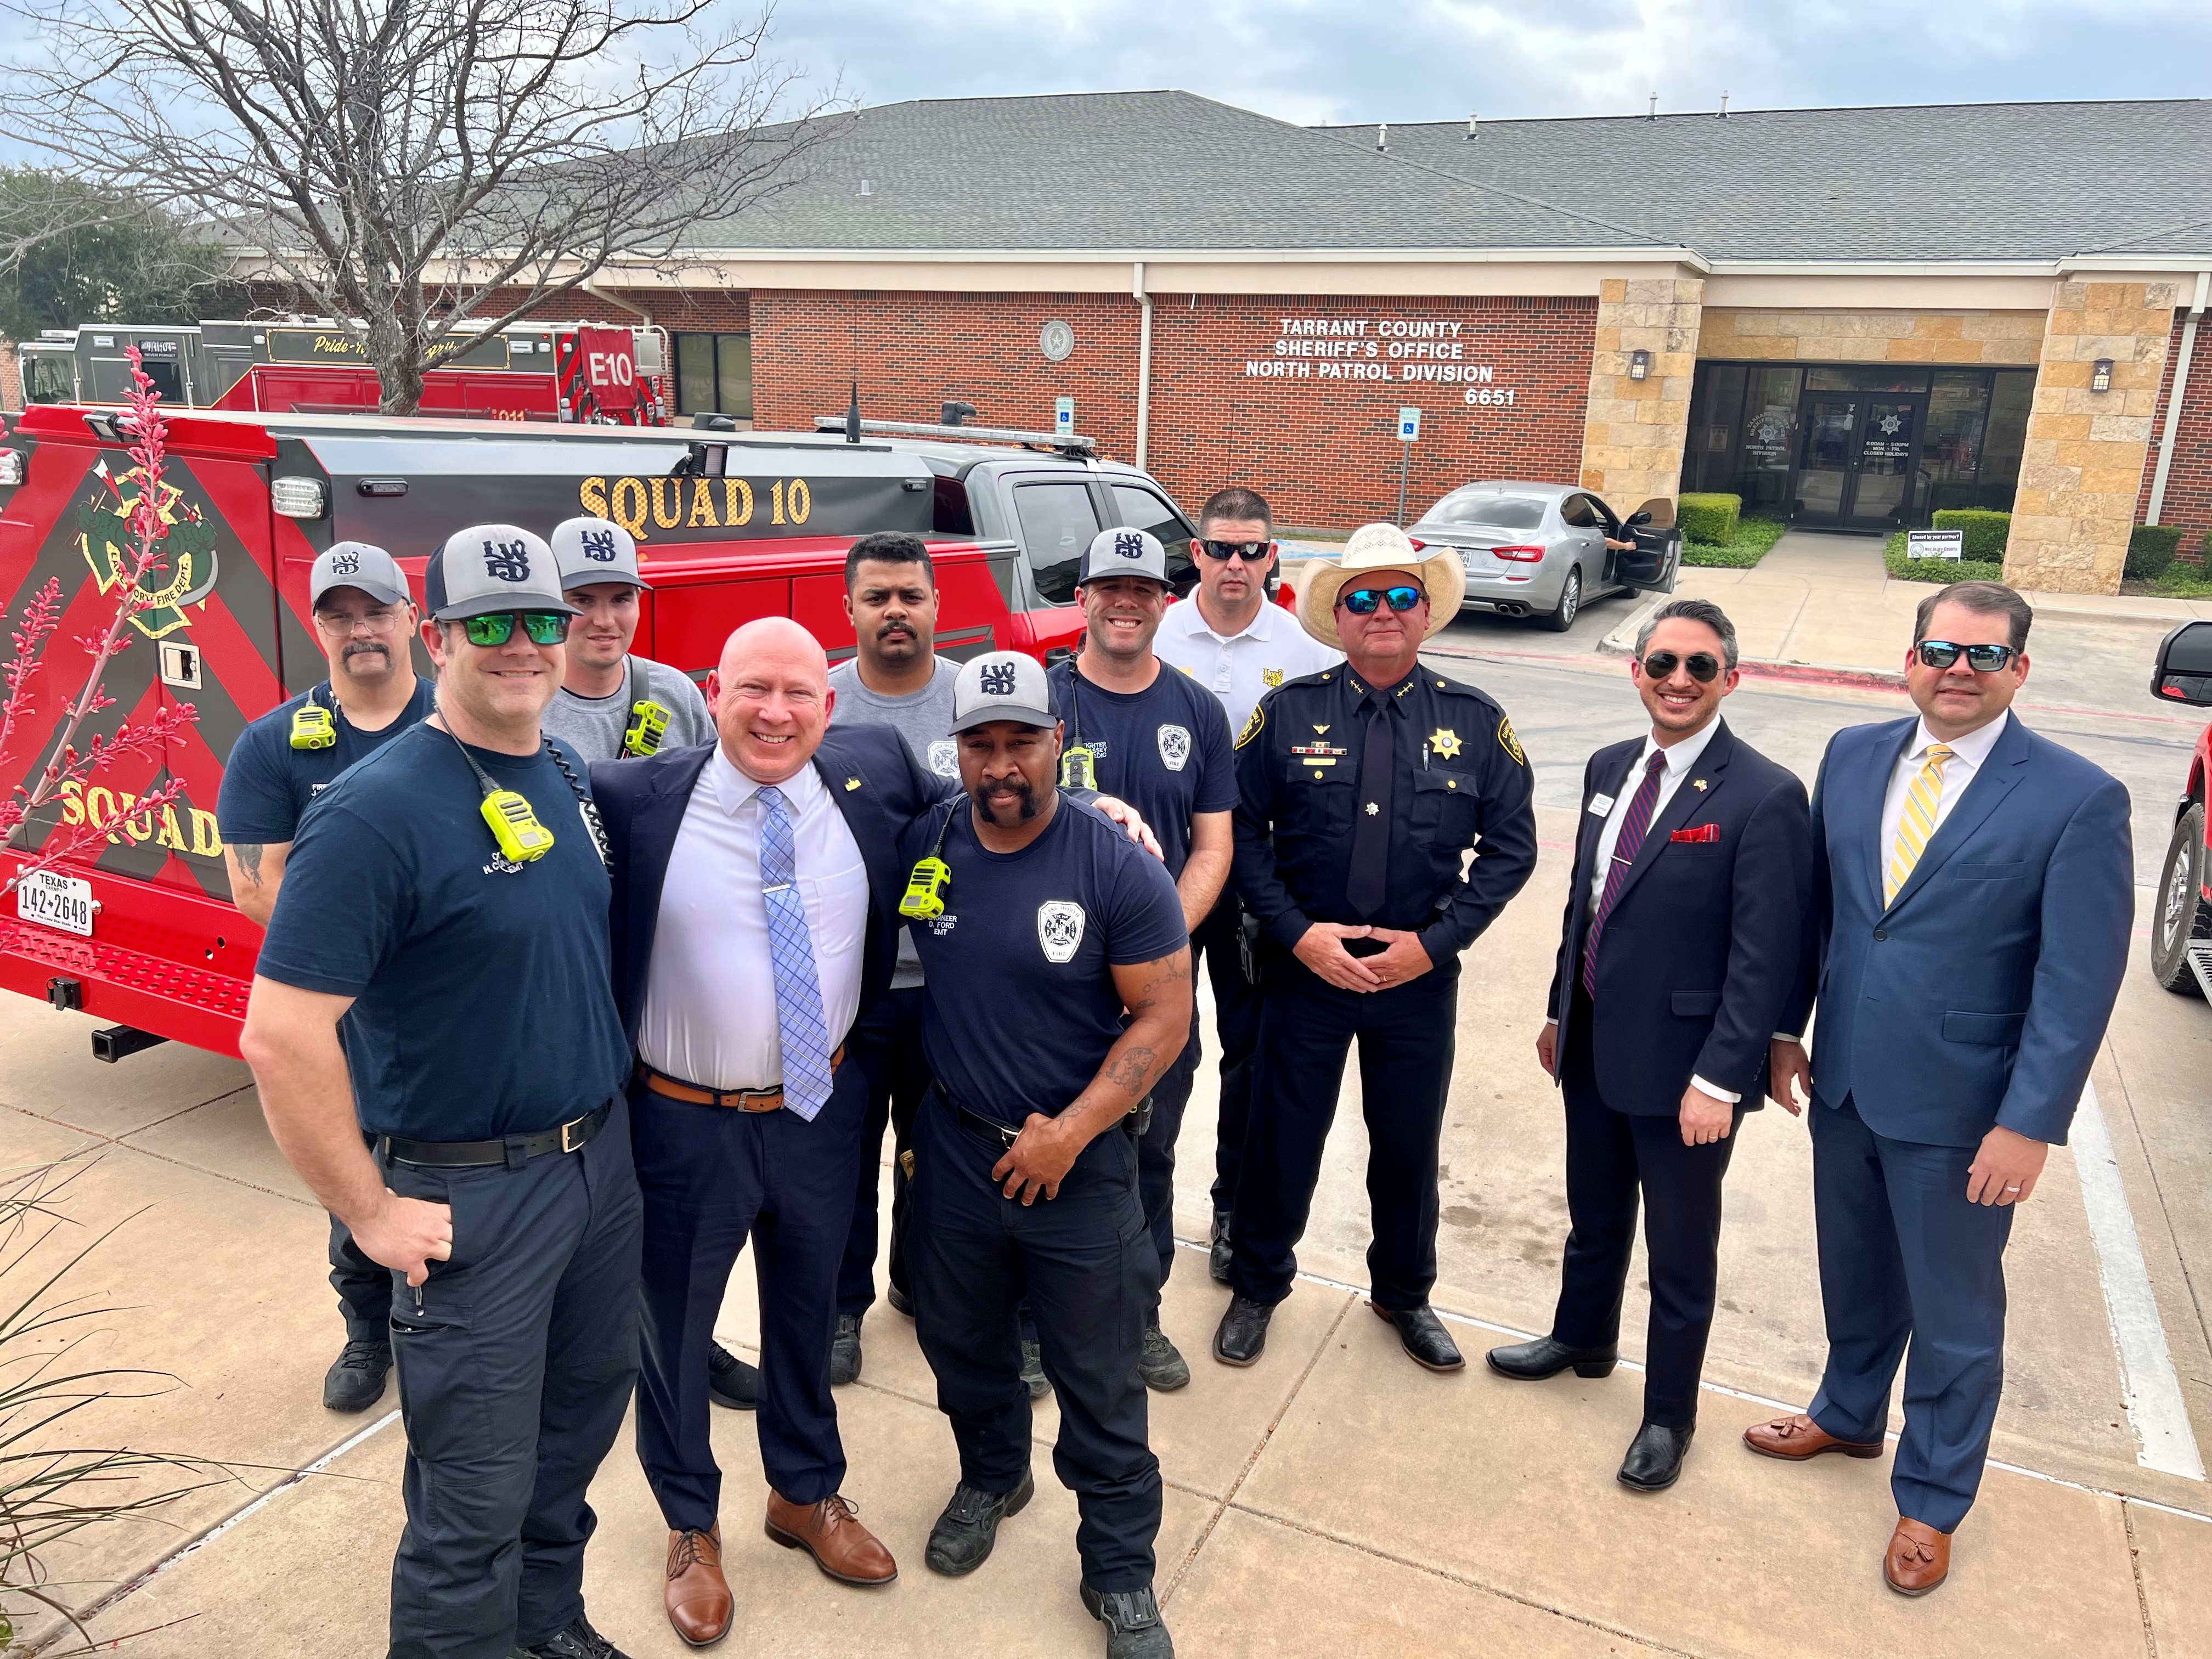 Group photo of judge, firemen and others